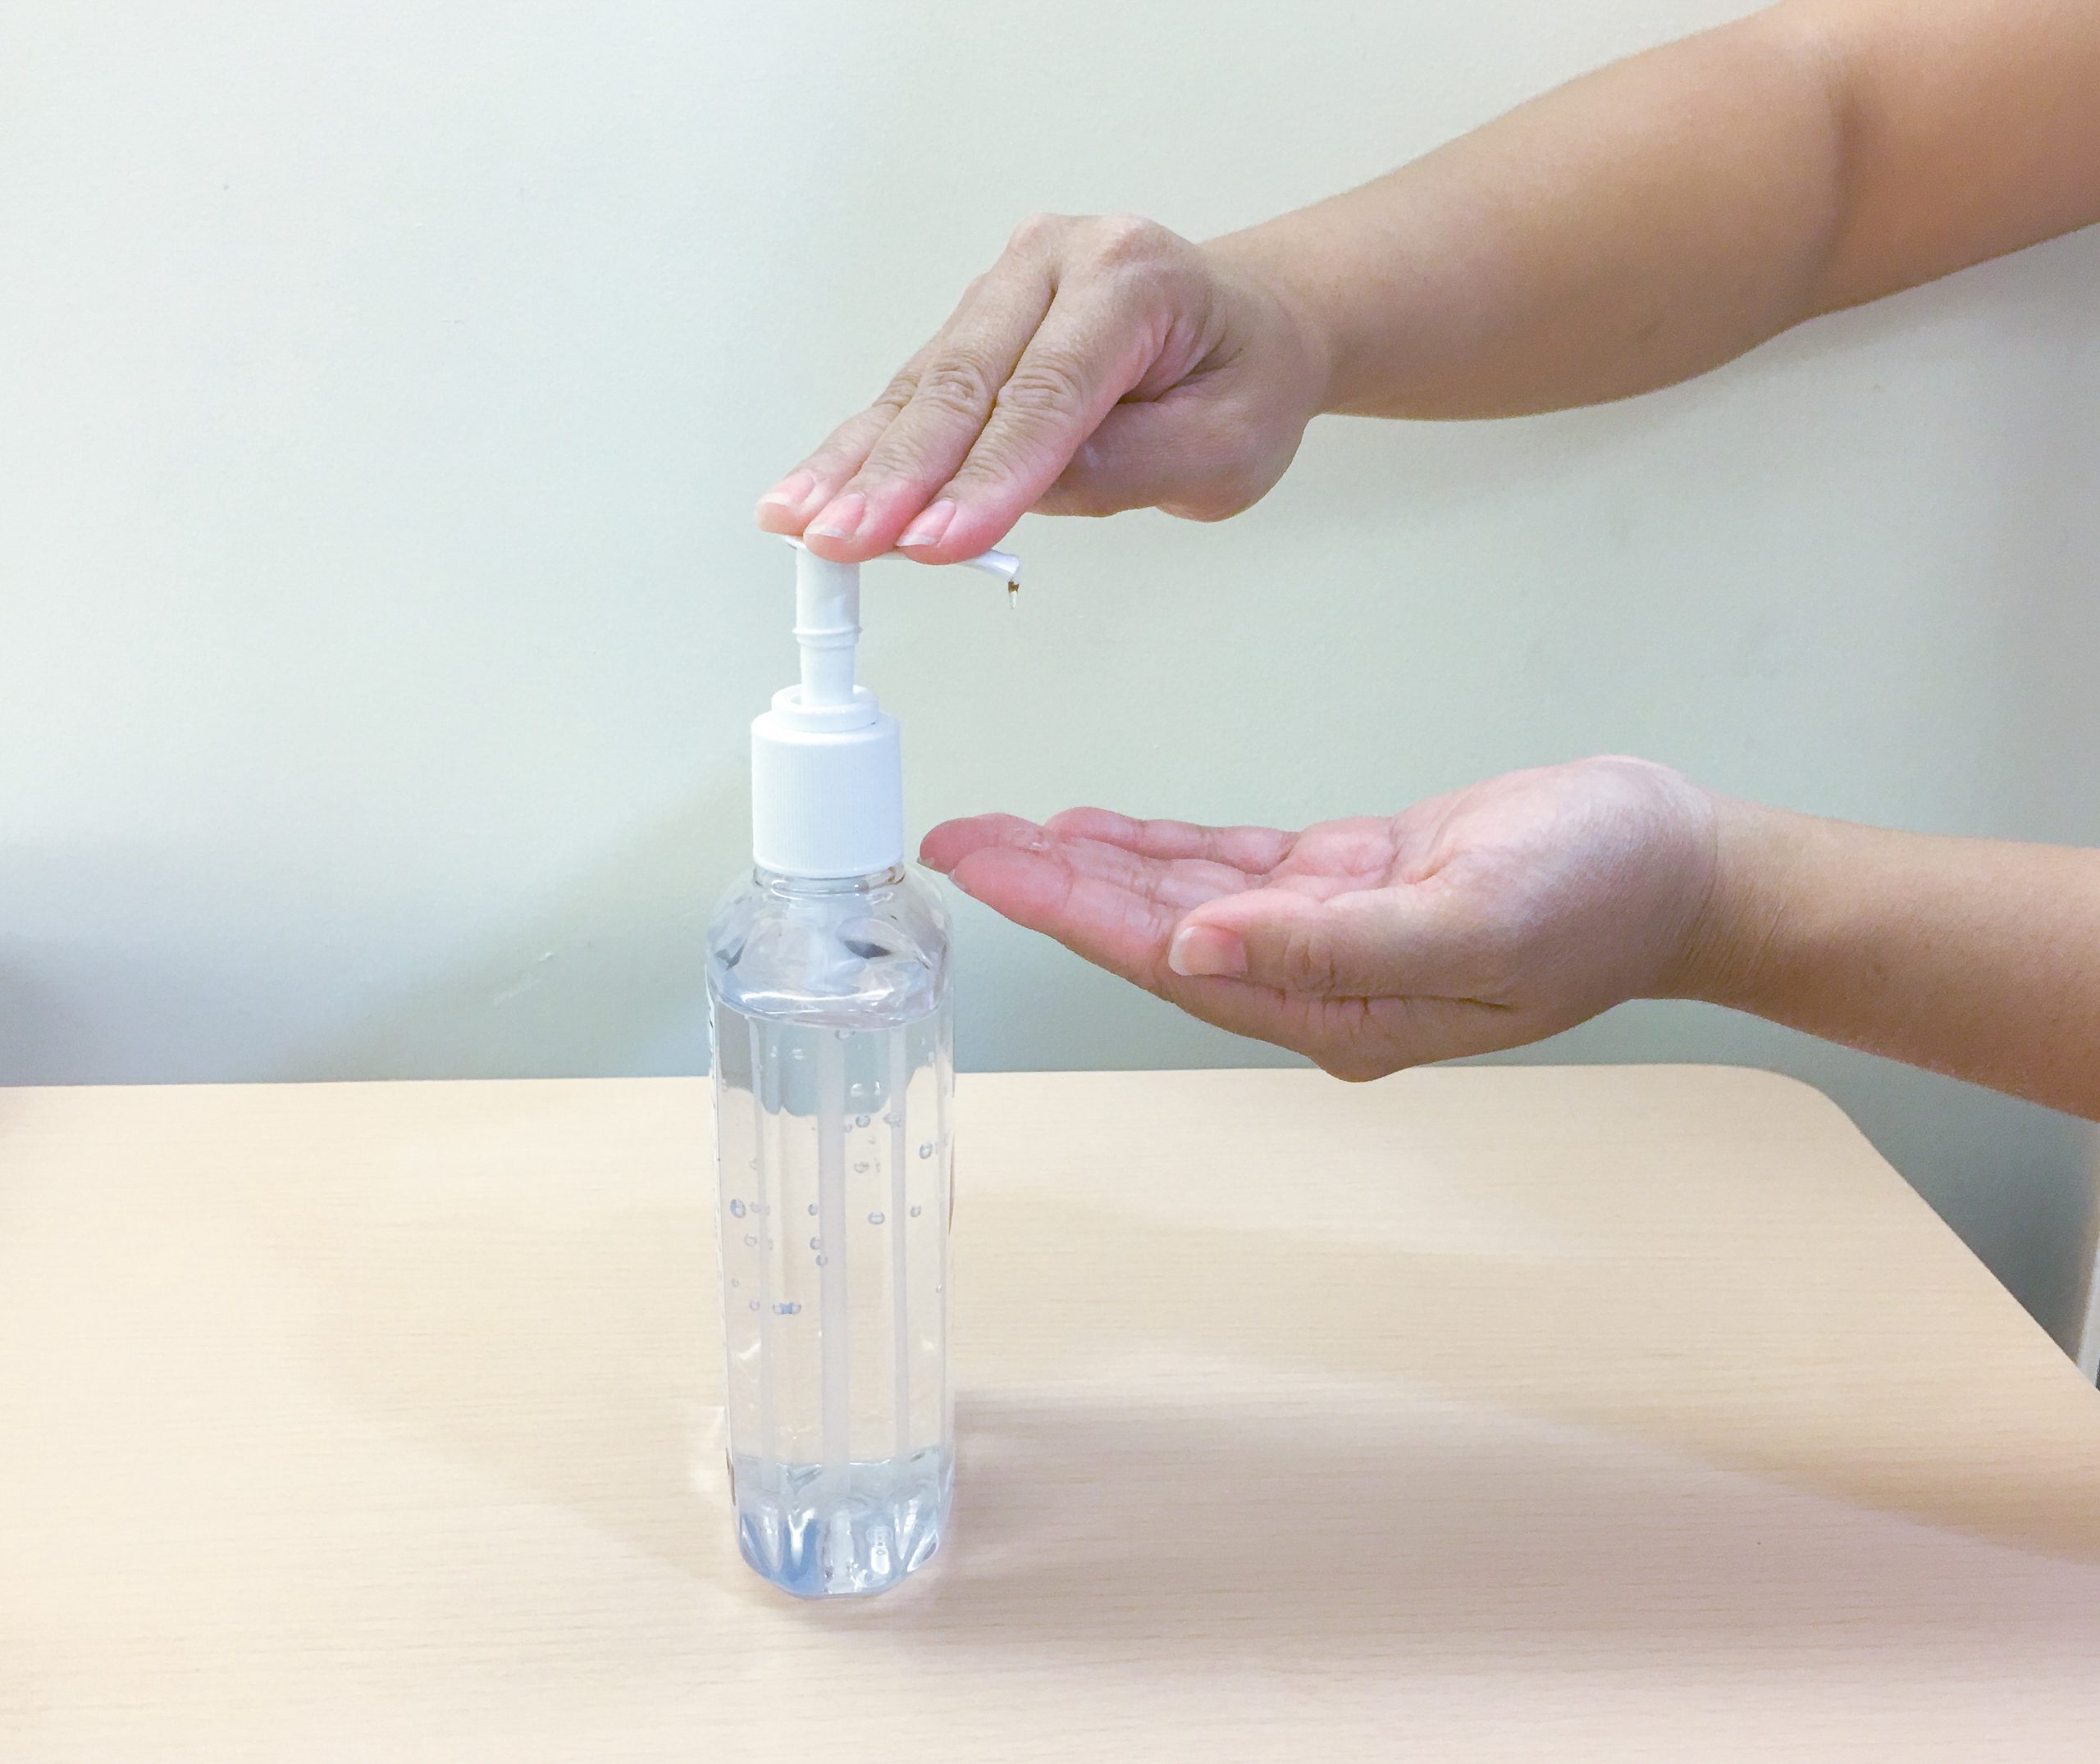  hand sanitizers